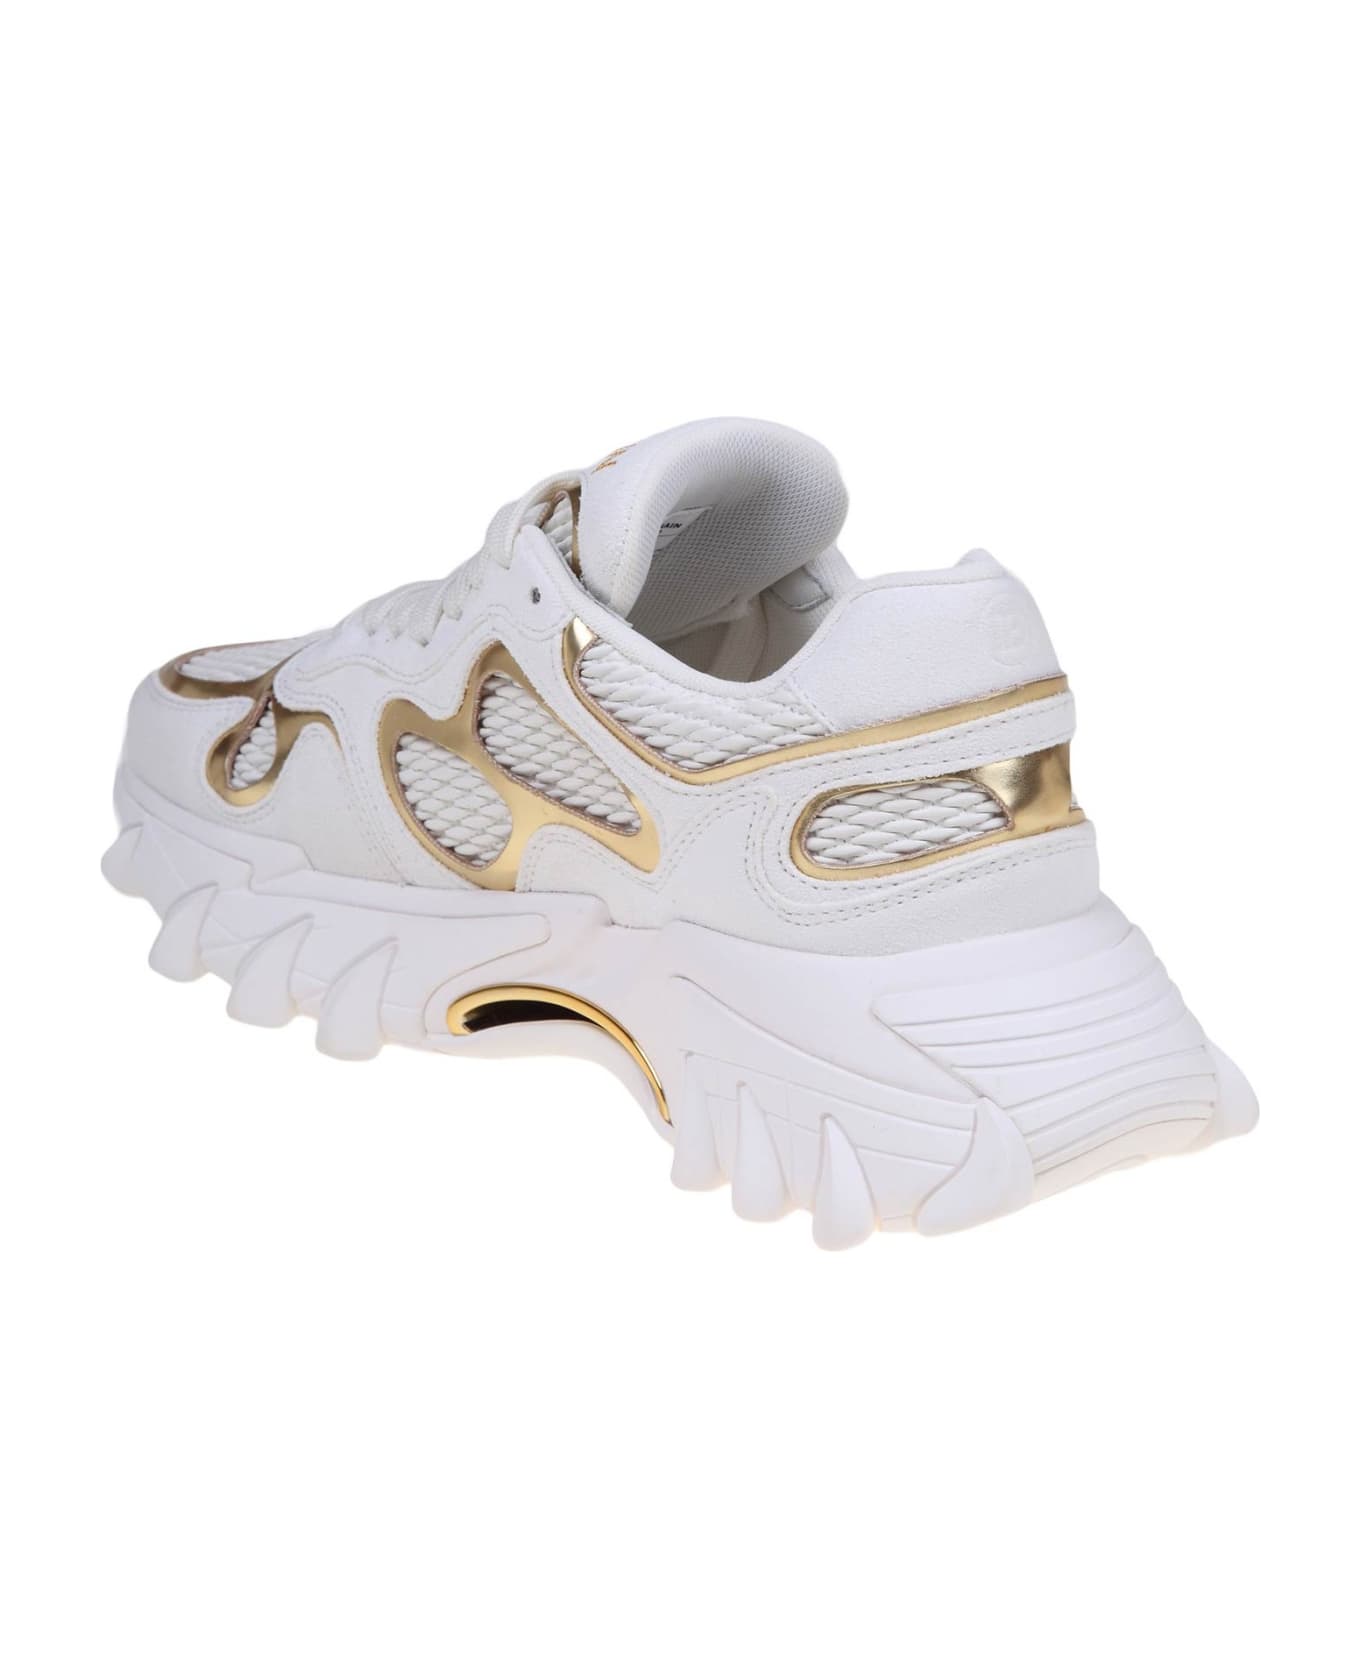 Balmain B-east Sneakers In White And Gold Suede And Leather - White/Gold